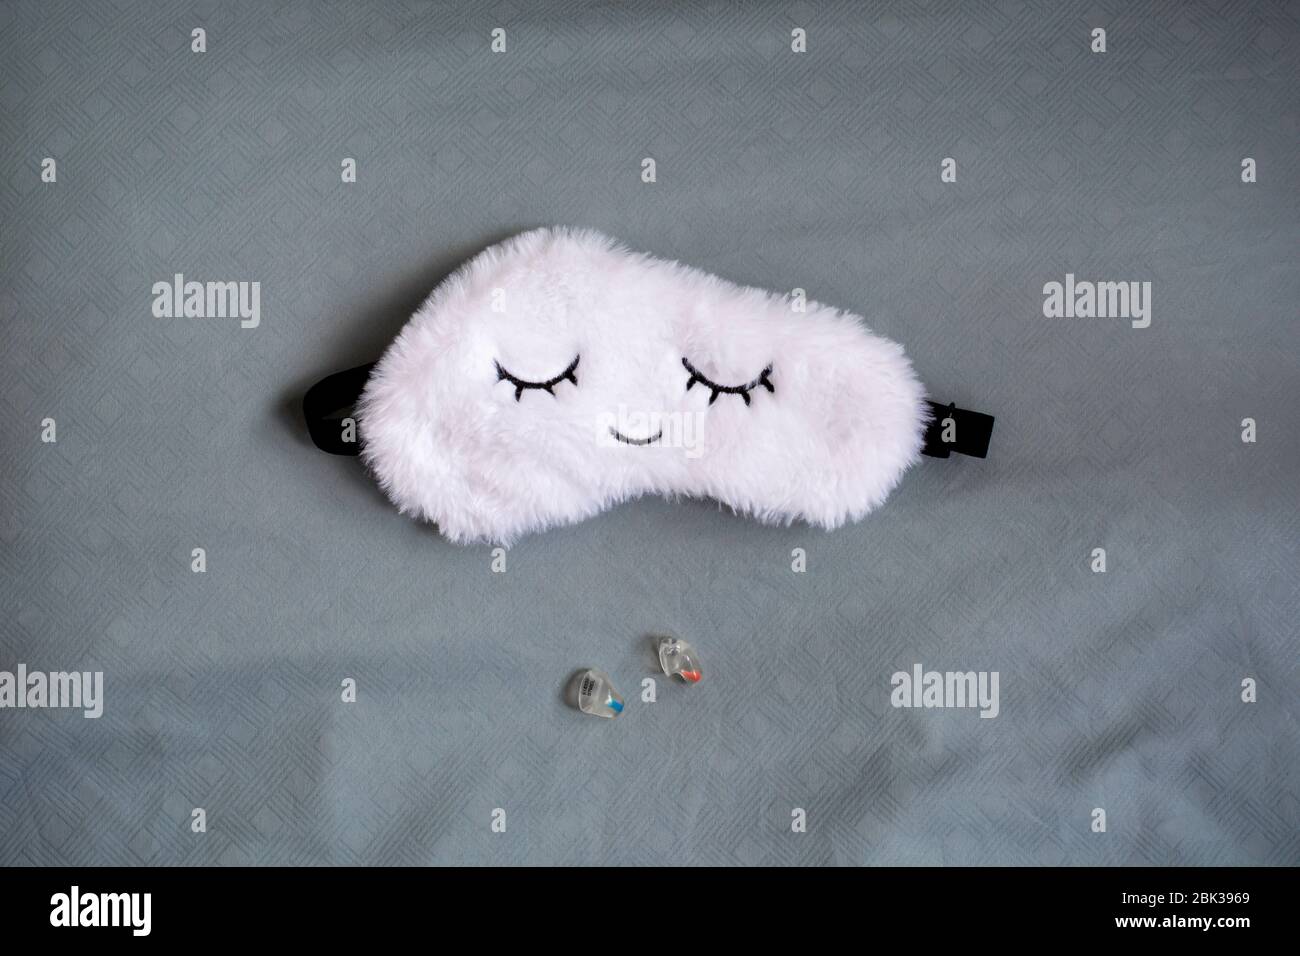 White cute sleep mask made of fluffy faux fur in a cloud shape with closed eyes embroidered on it and custom molded sleep ear plugs on a blue grey pil Stock Photo